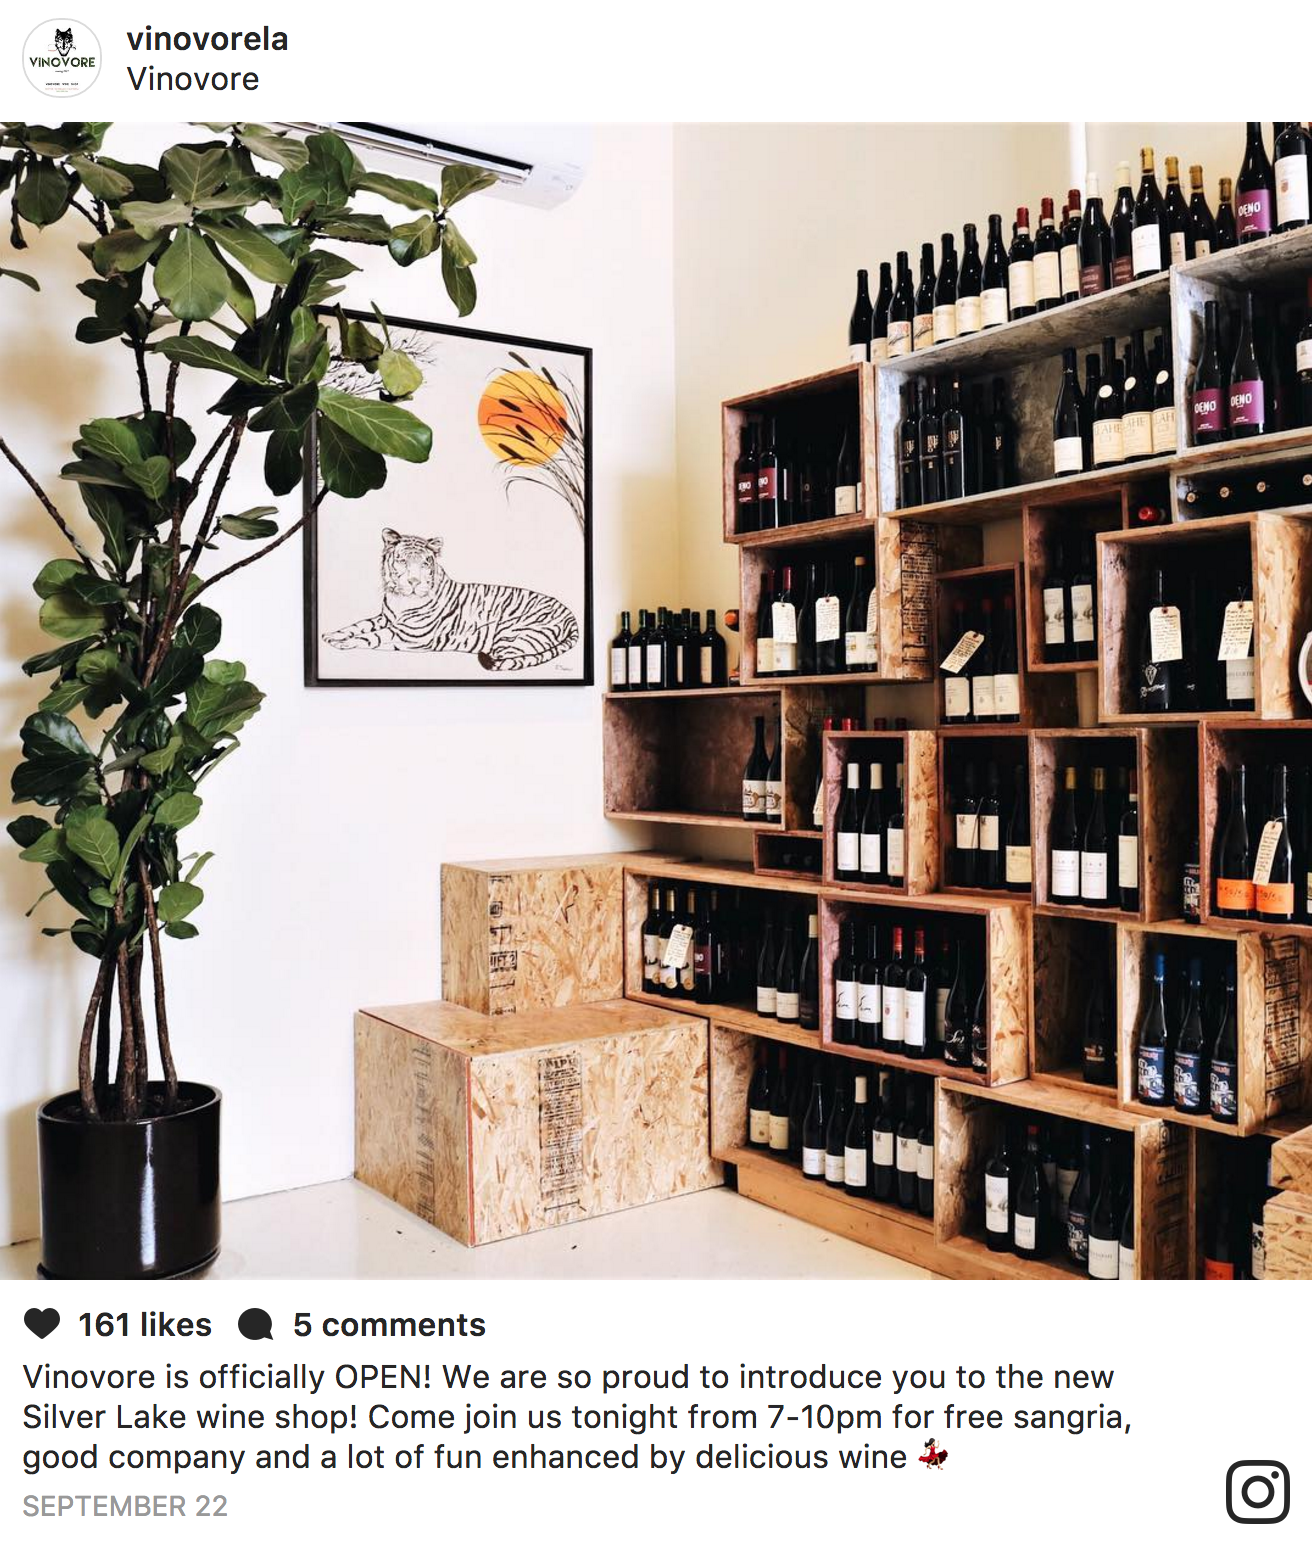 Tiger painting on the wall with wine bottles on shelves